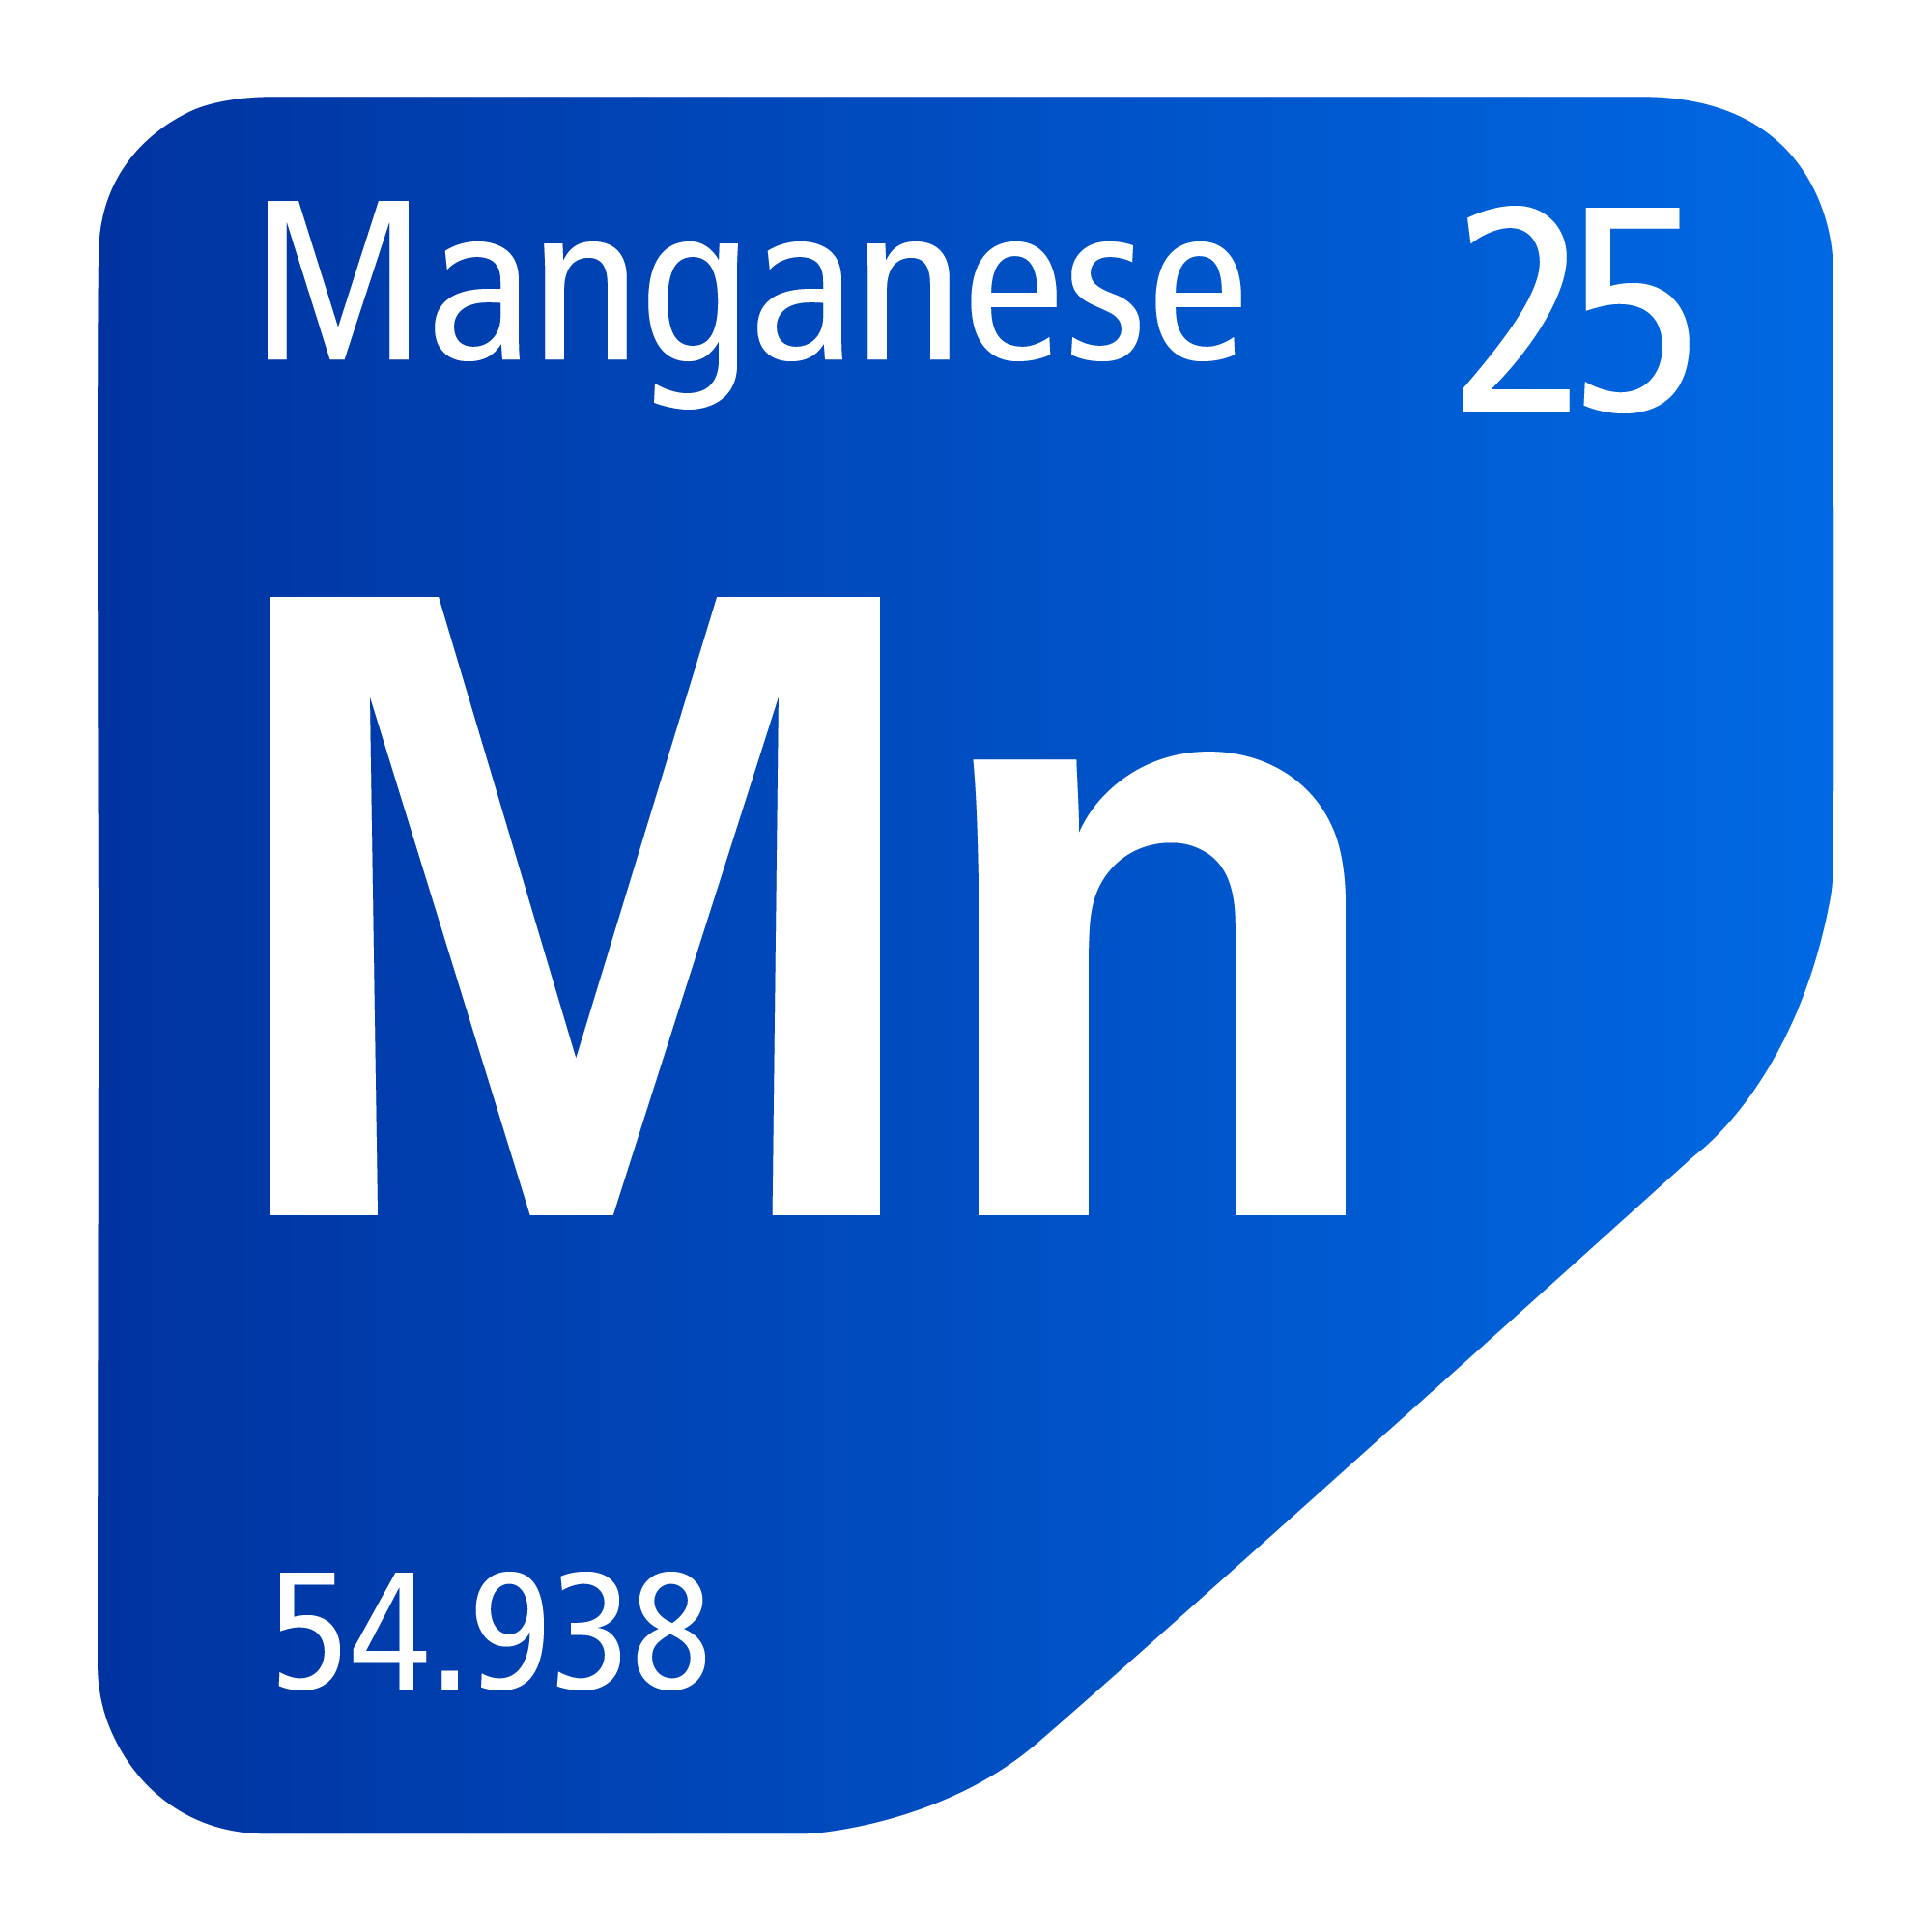 List of Behansar products in Manganese category